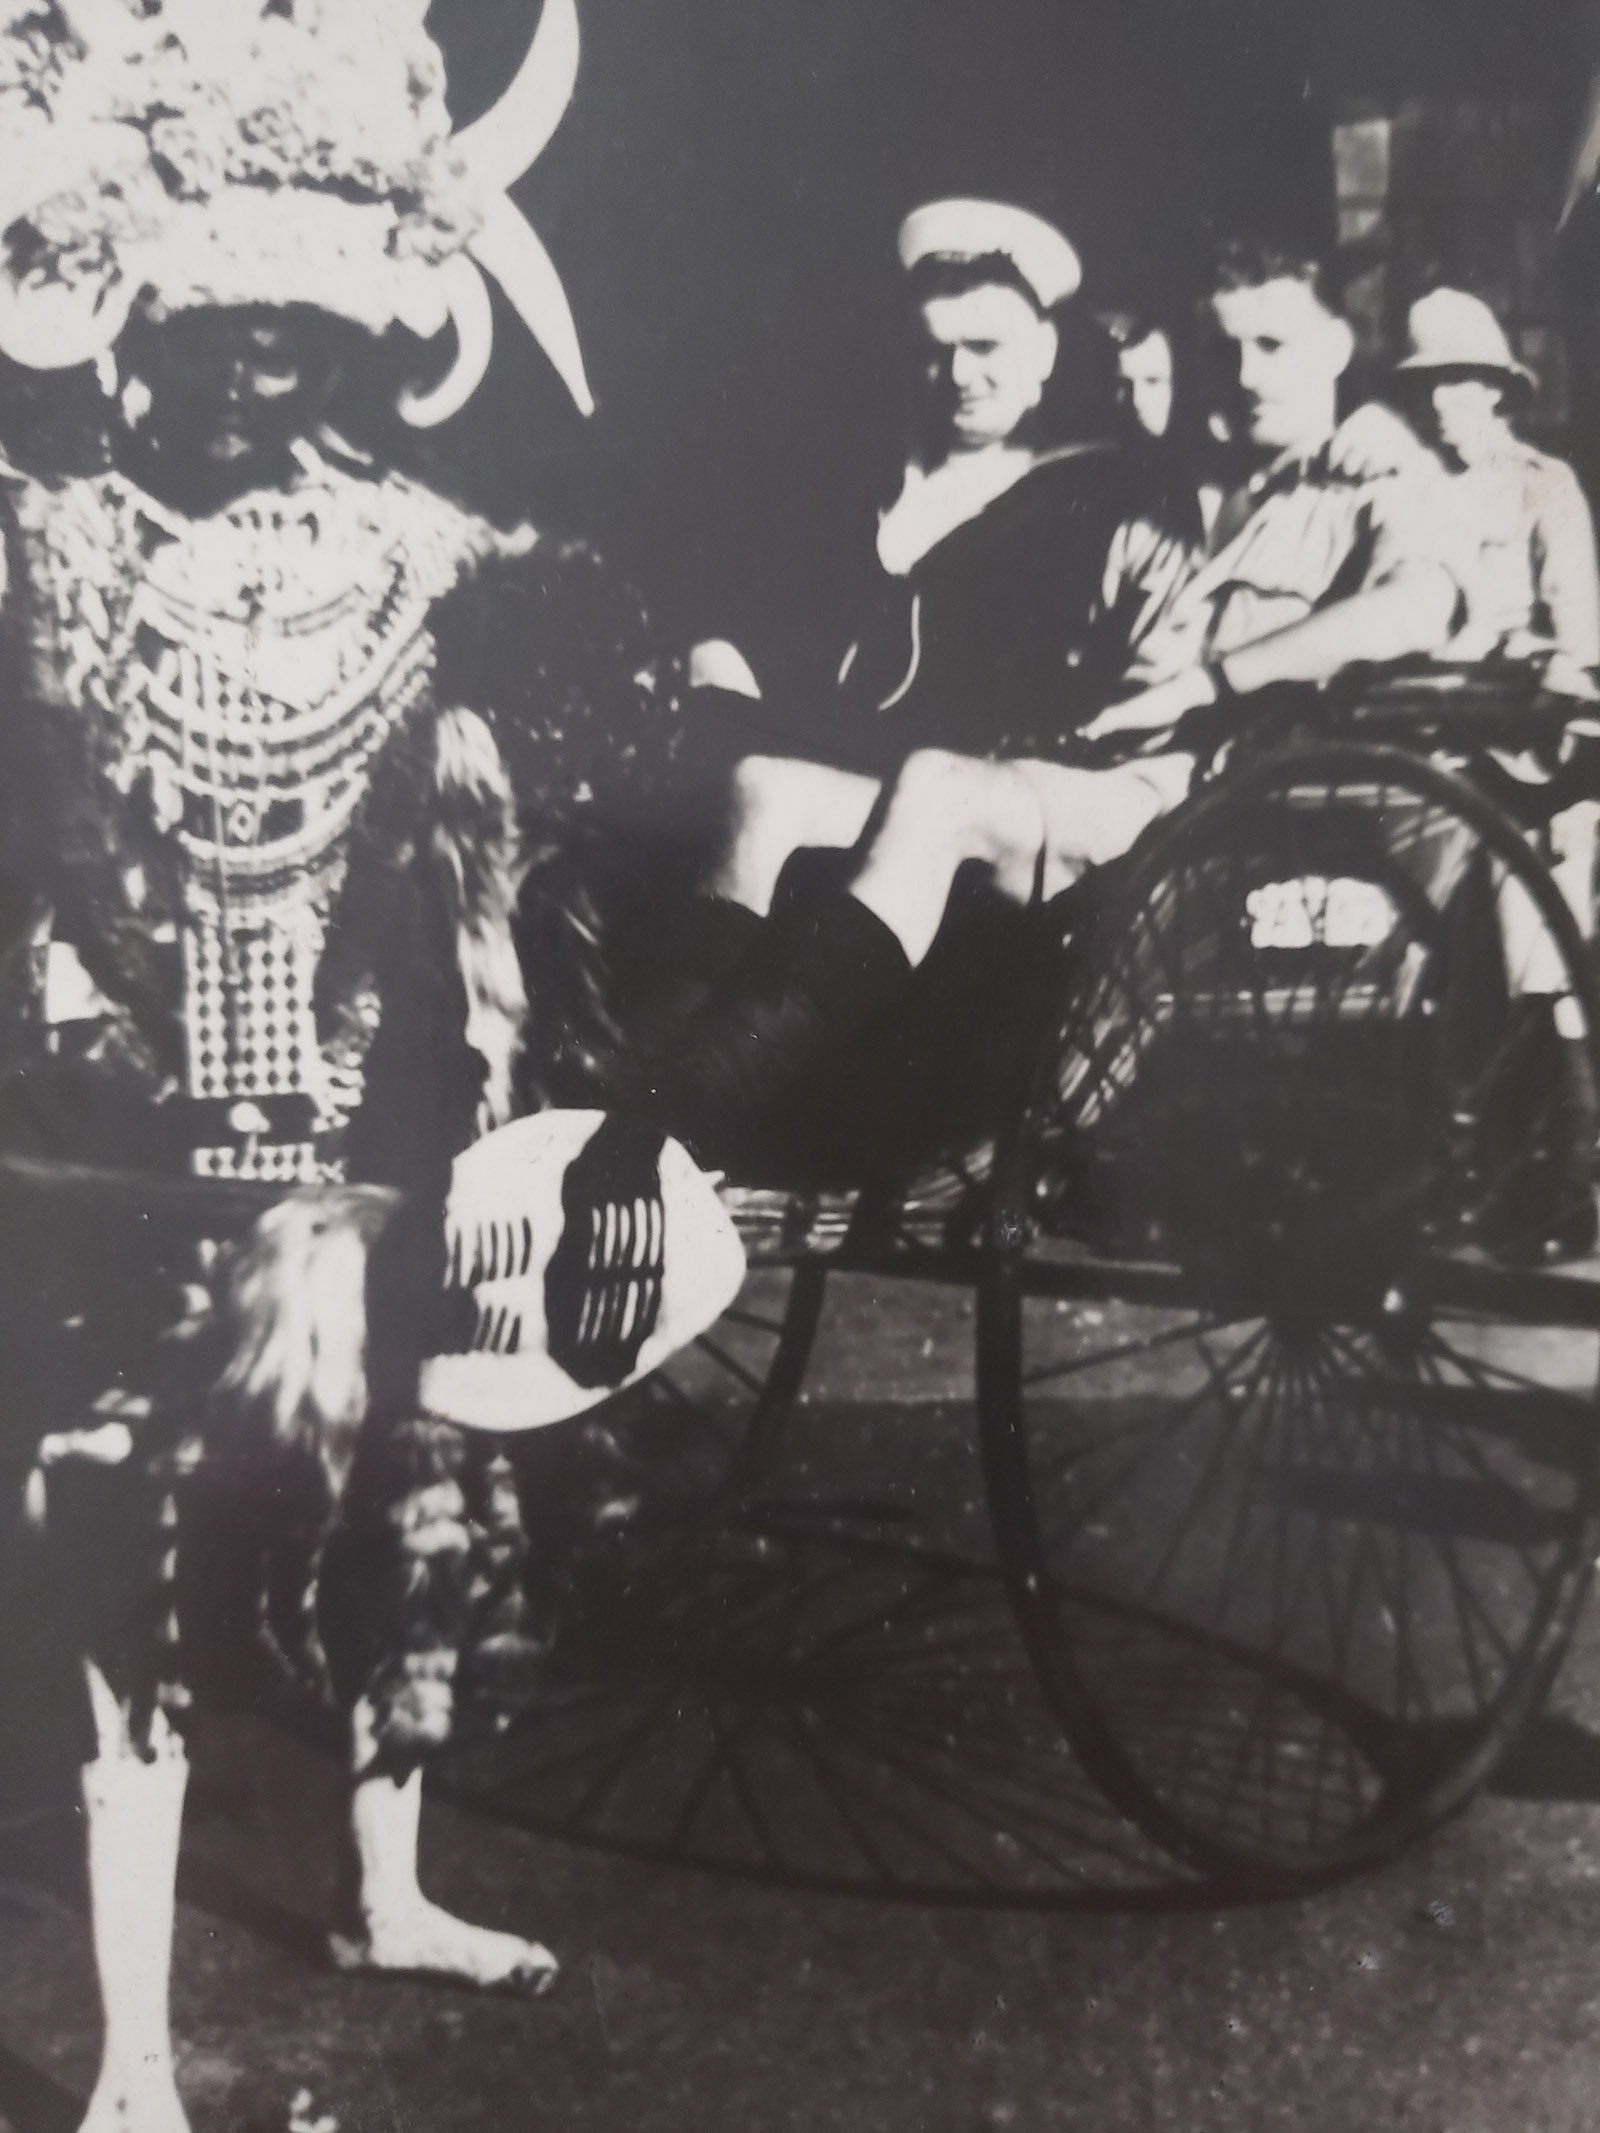 Wall and his brother on a rickshaw in Mombassa in 1944.